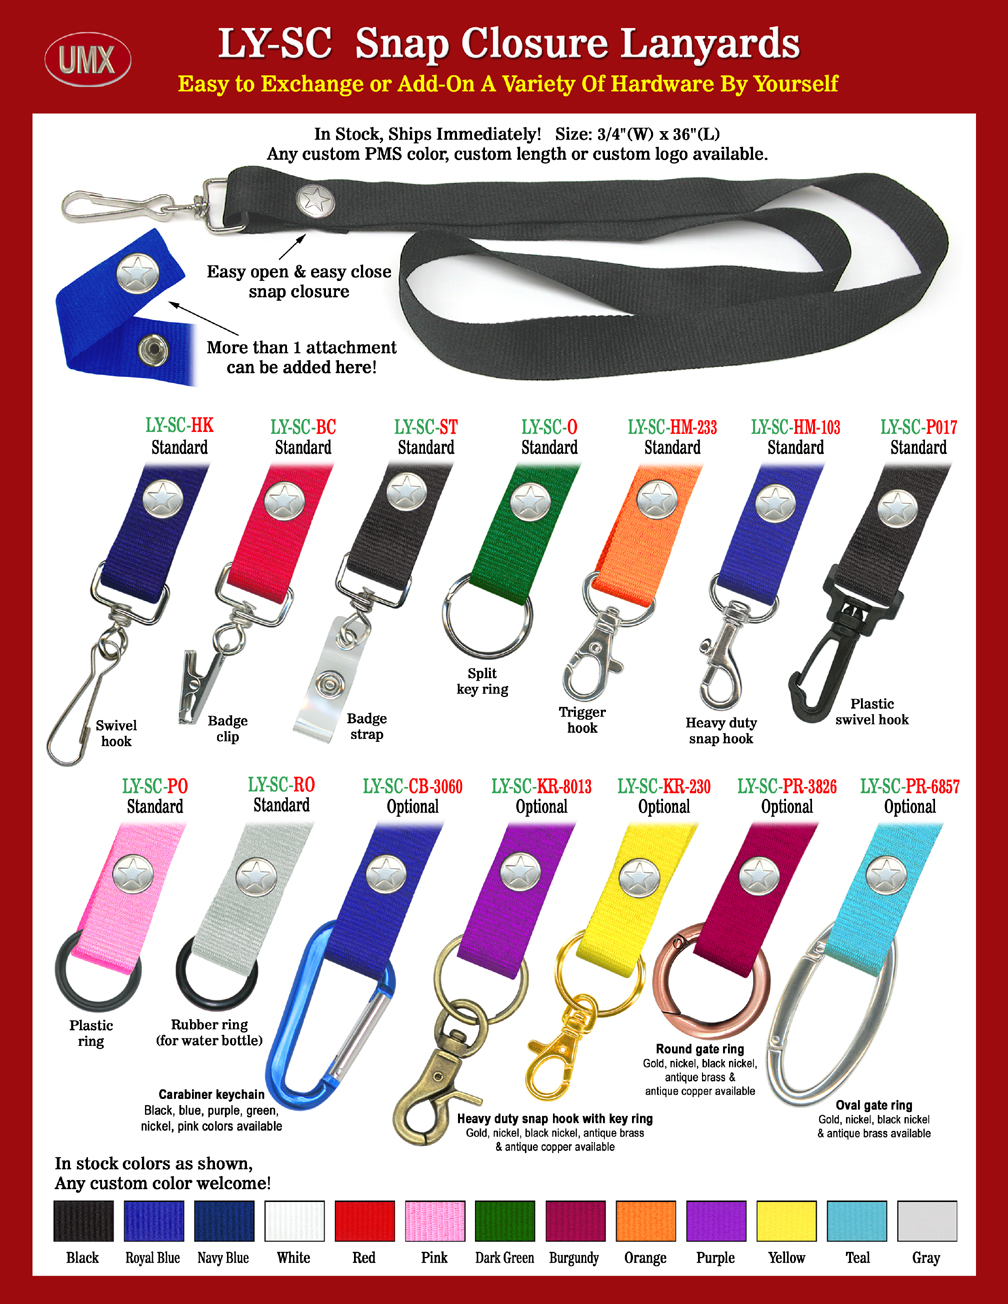 The 3/4" wide by 36" long heavy duty low cost snap-on lanyards come with 13 colors available, black, royal blue, navy blue, red, dark green, orange, yellow, pink, gray, purple, burgundy and teal colors. 